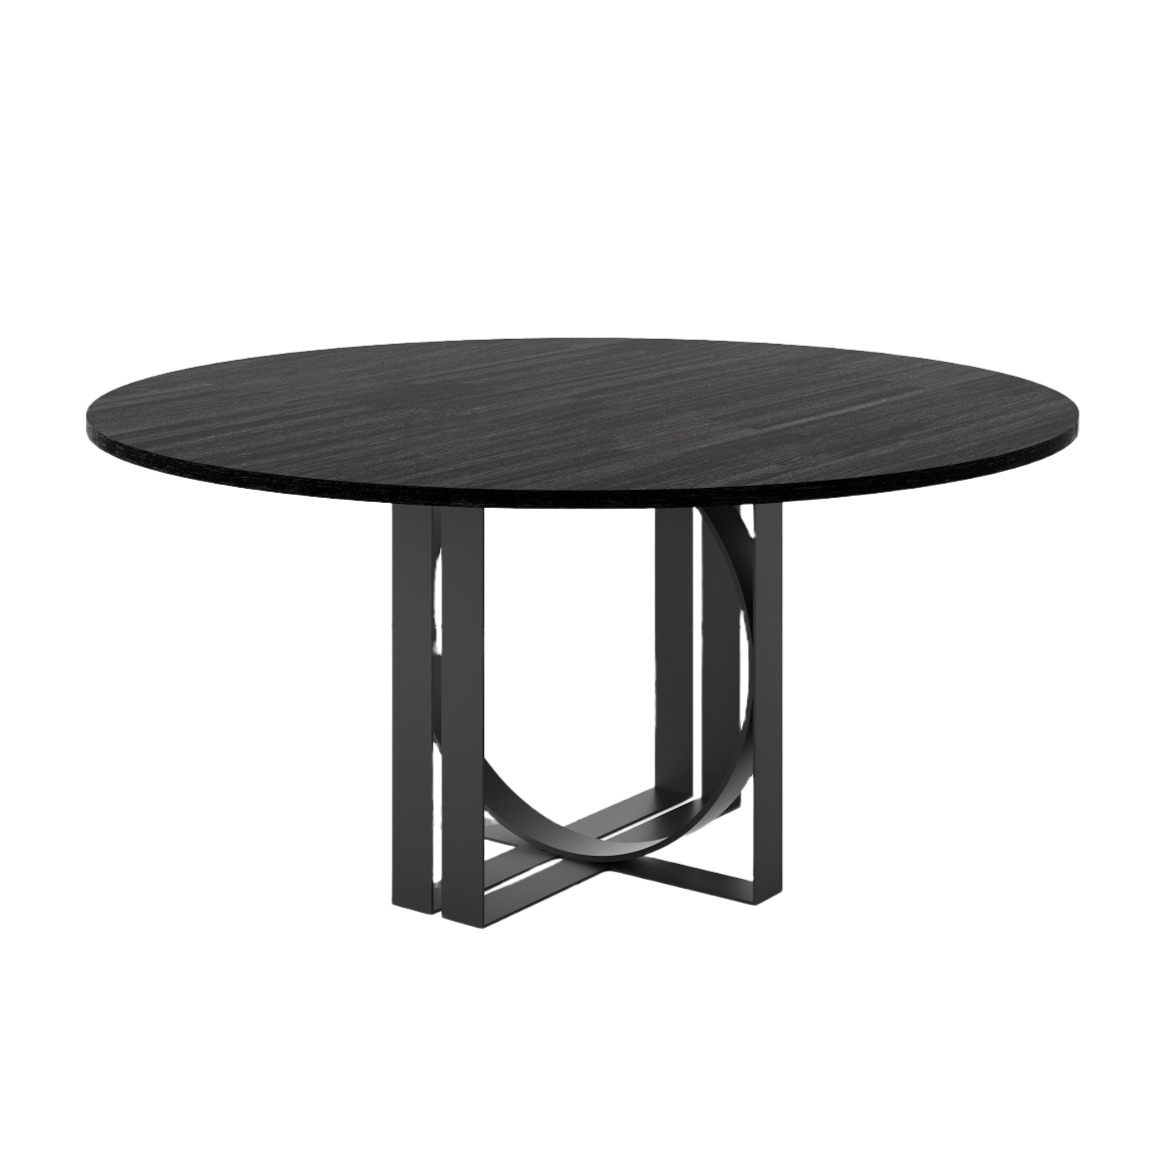 RING table black with black top, Absynth, Eye on Design